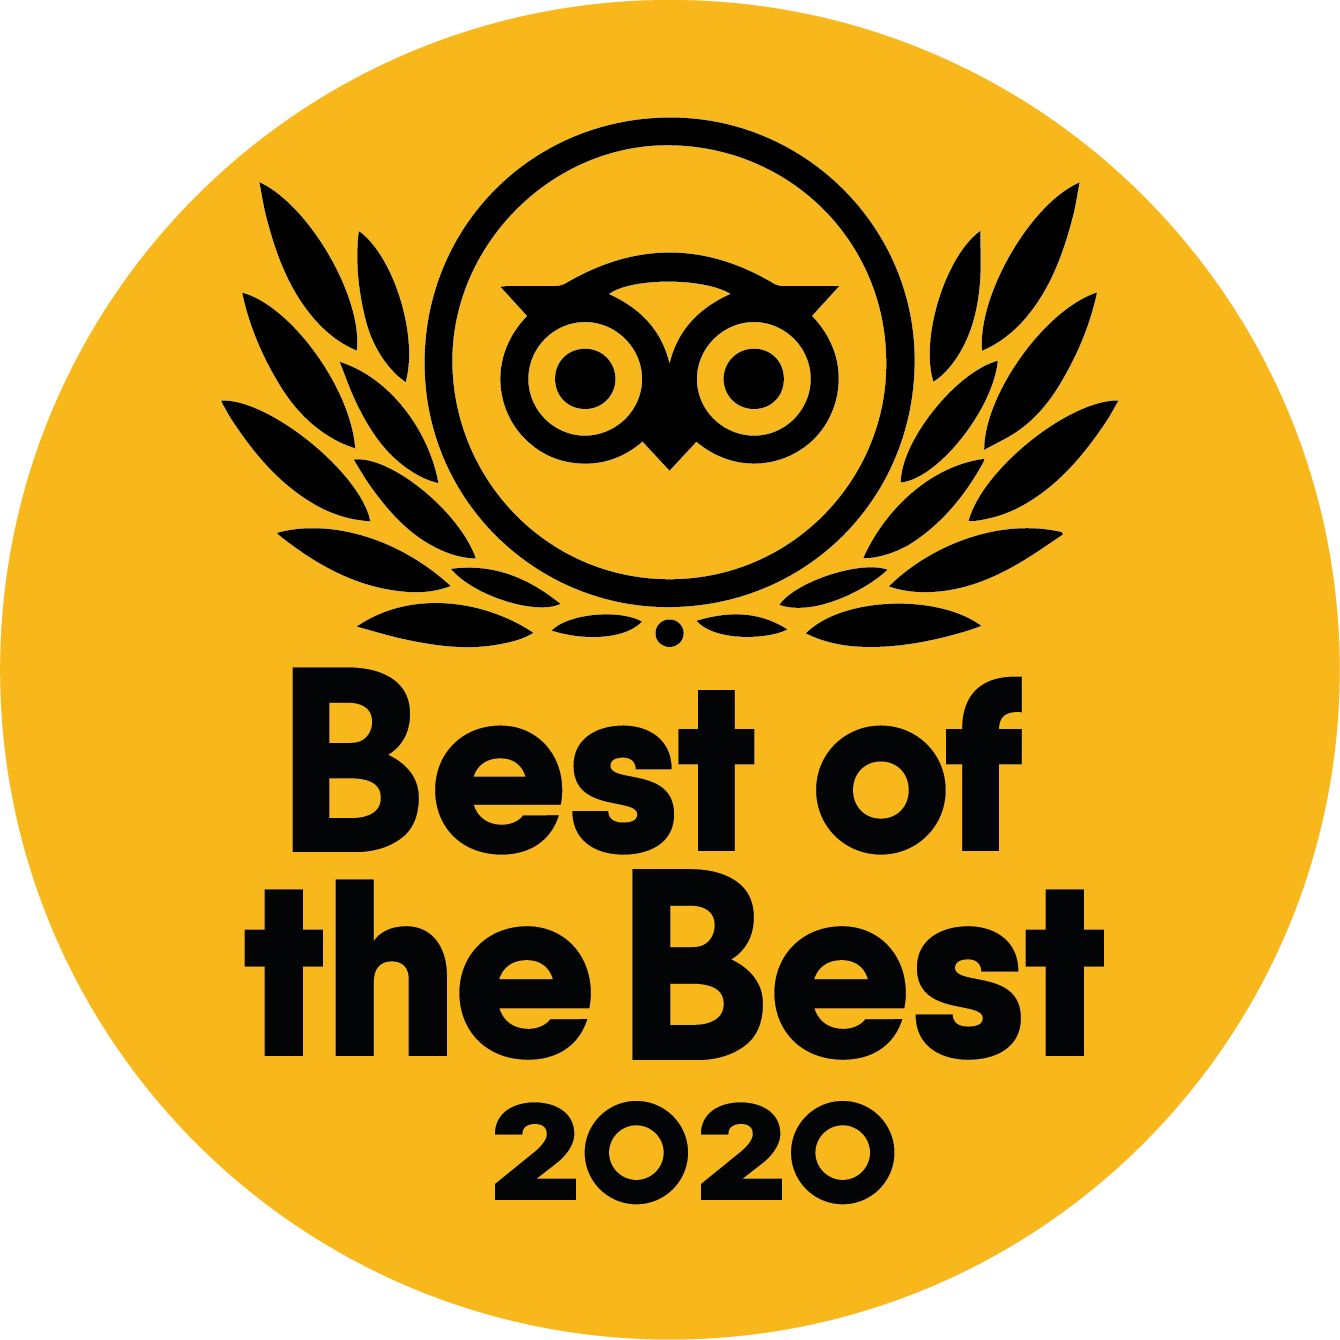 Travellers’ Choice “Best of the Best” 2020